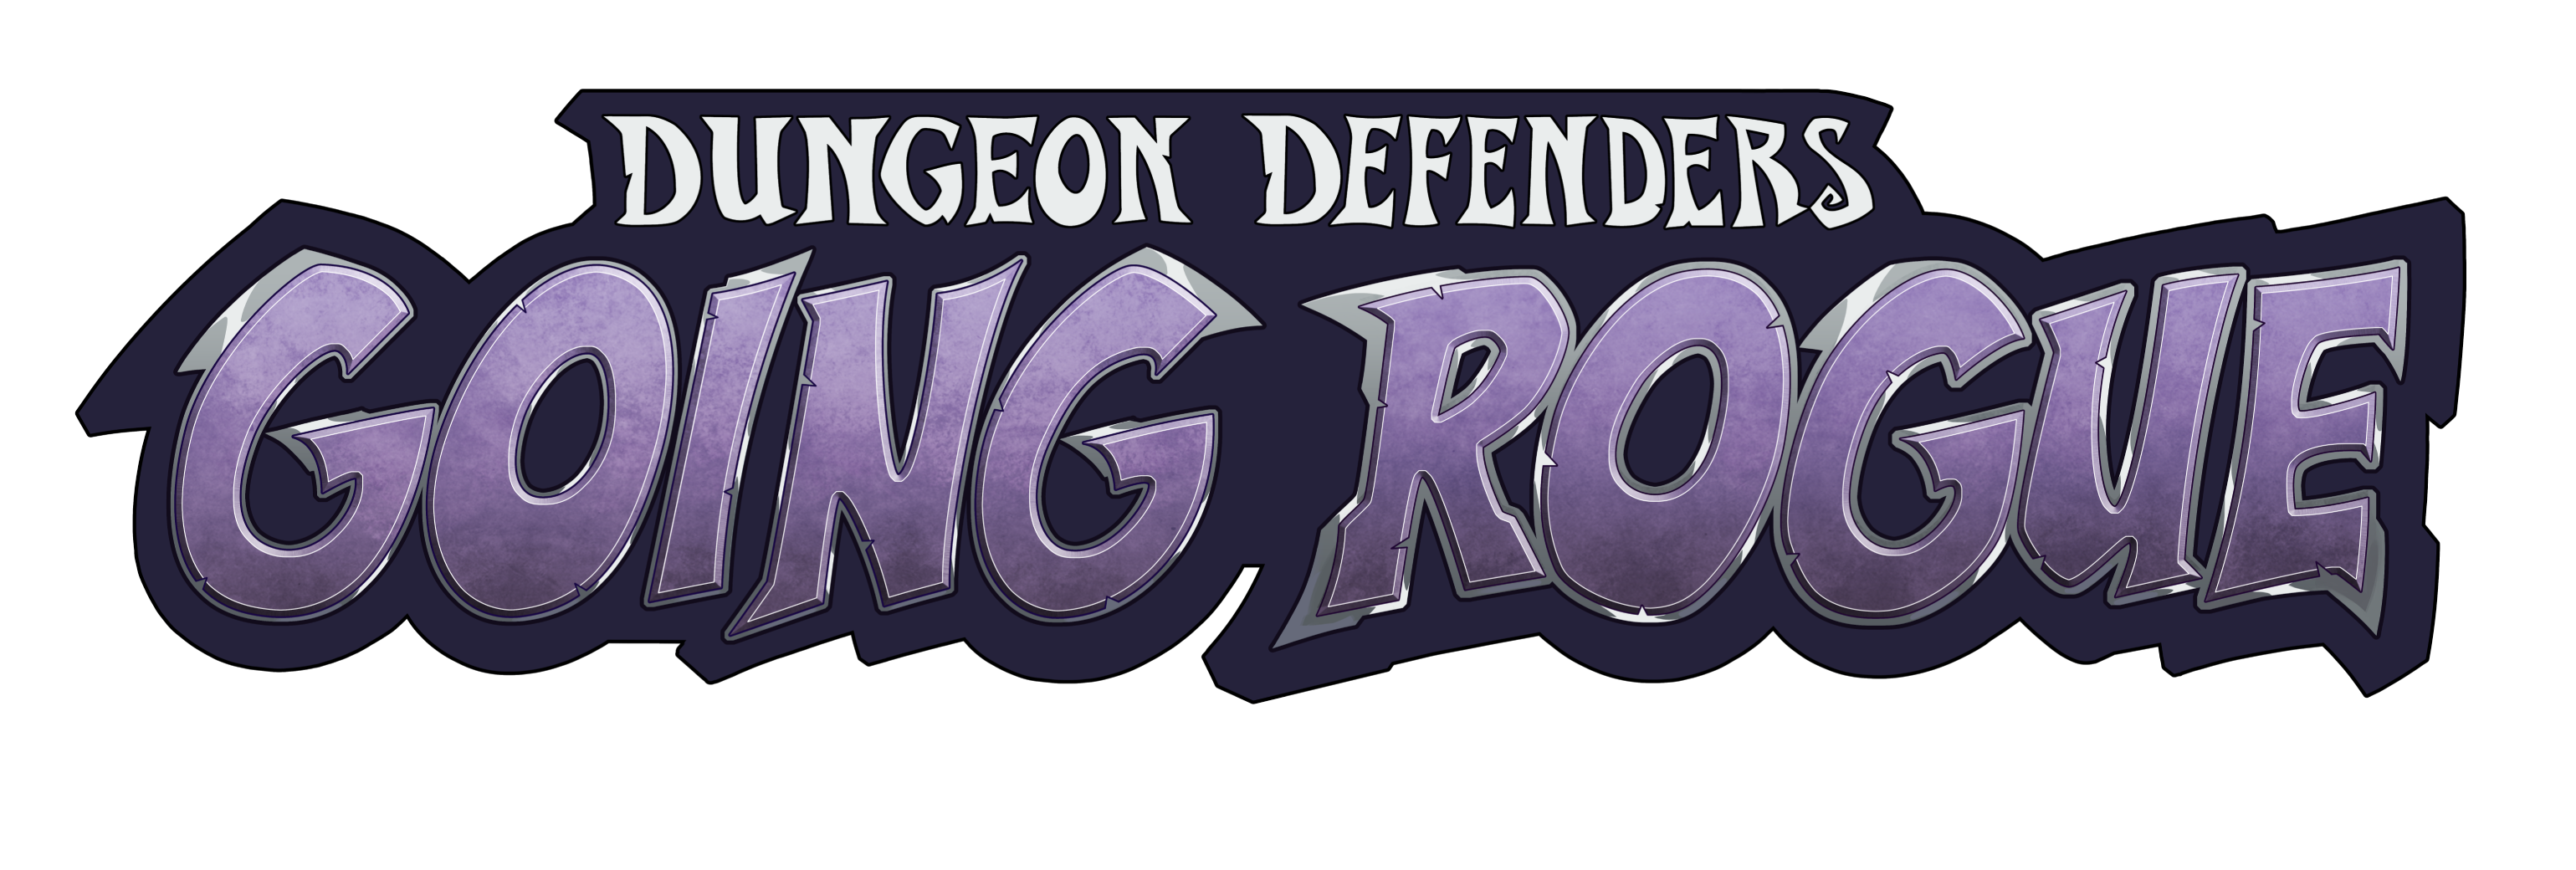 Dungeons & Dragons RPG coming to PS4 and Xbox One - KLGadgetGuy